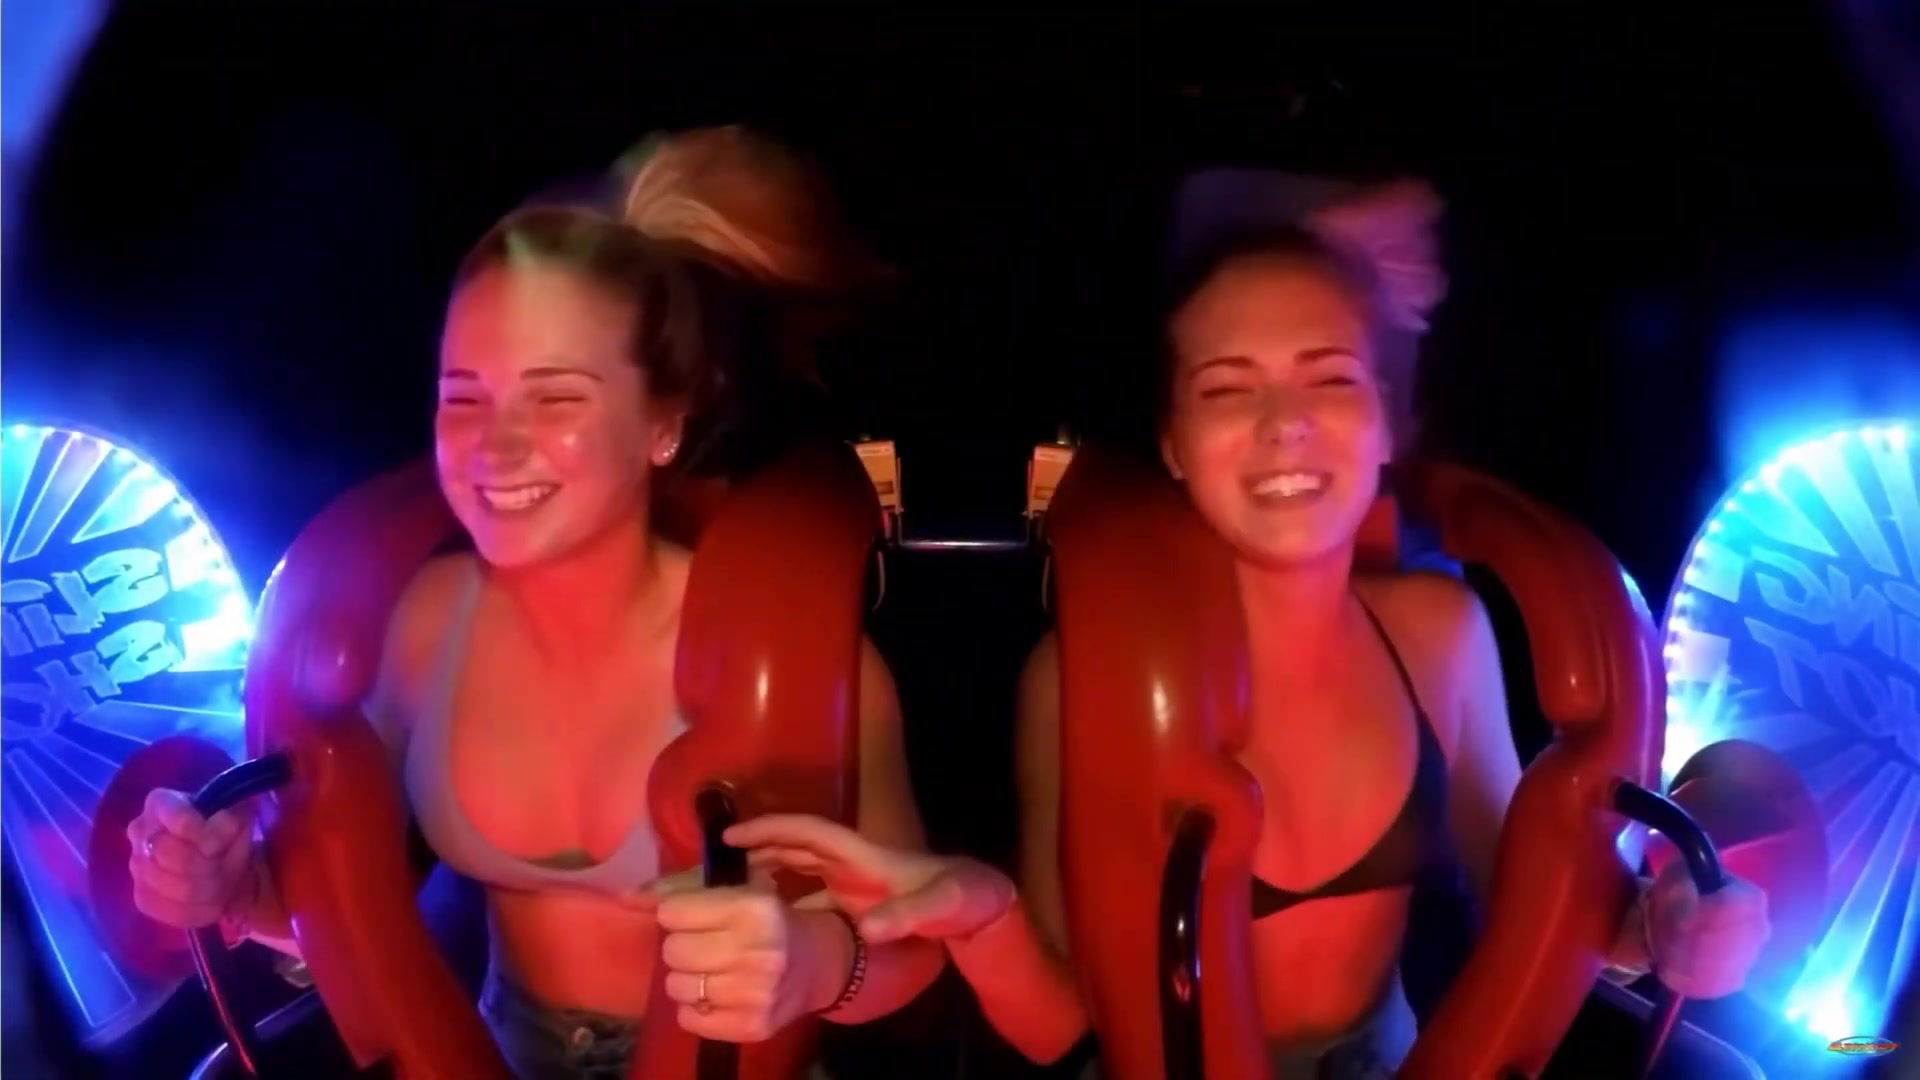 Slingshot Ride Slip 32 Nudity, Sexually and Explicit Video on YouTube.